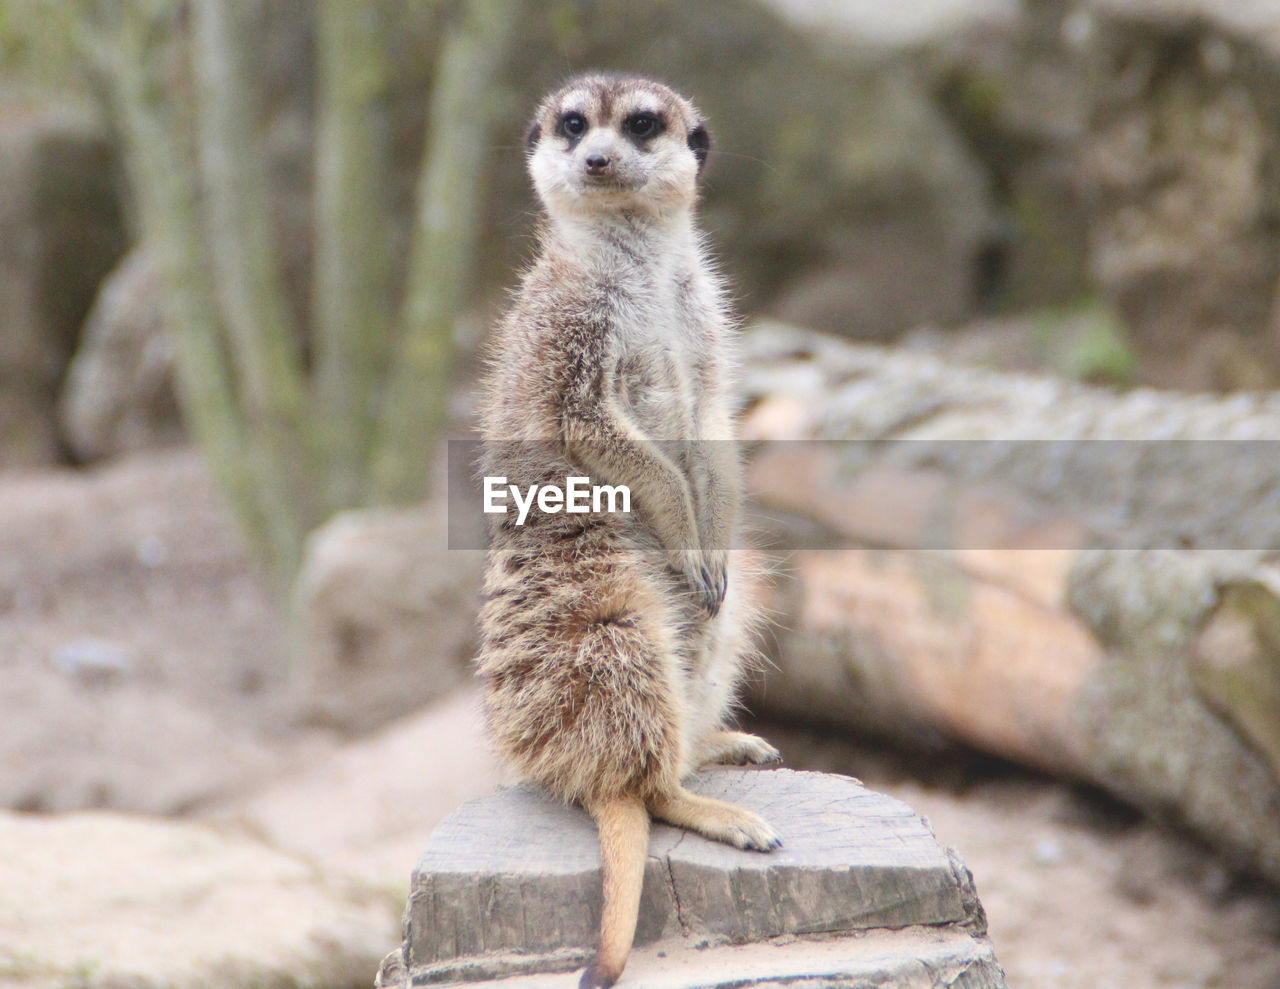 Close-up of meerkat against blurred background